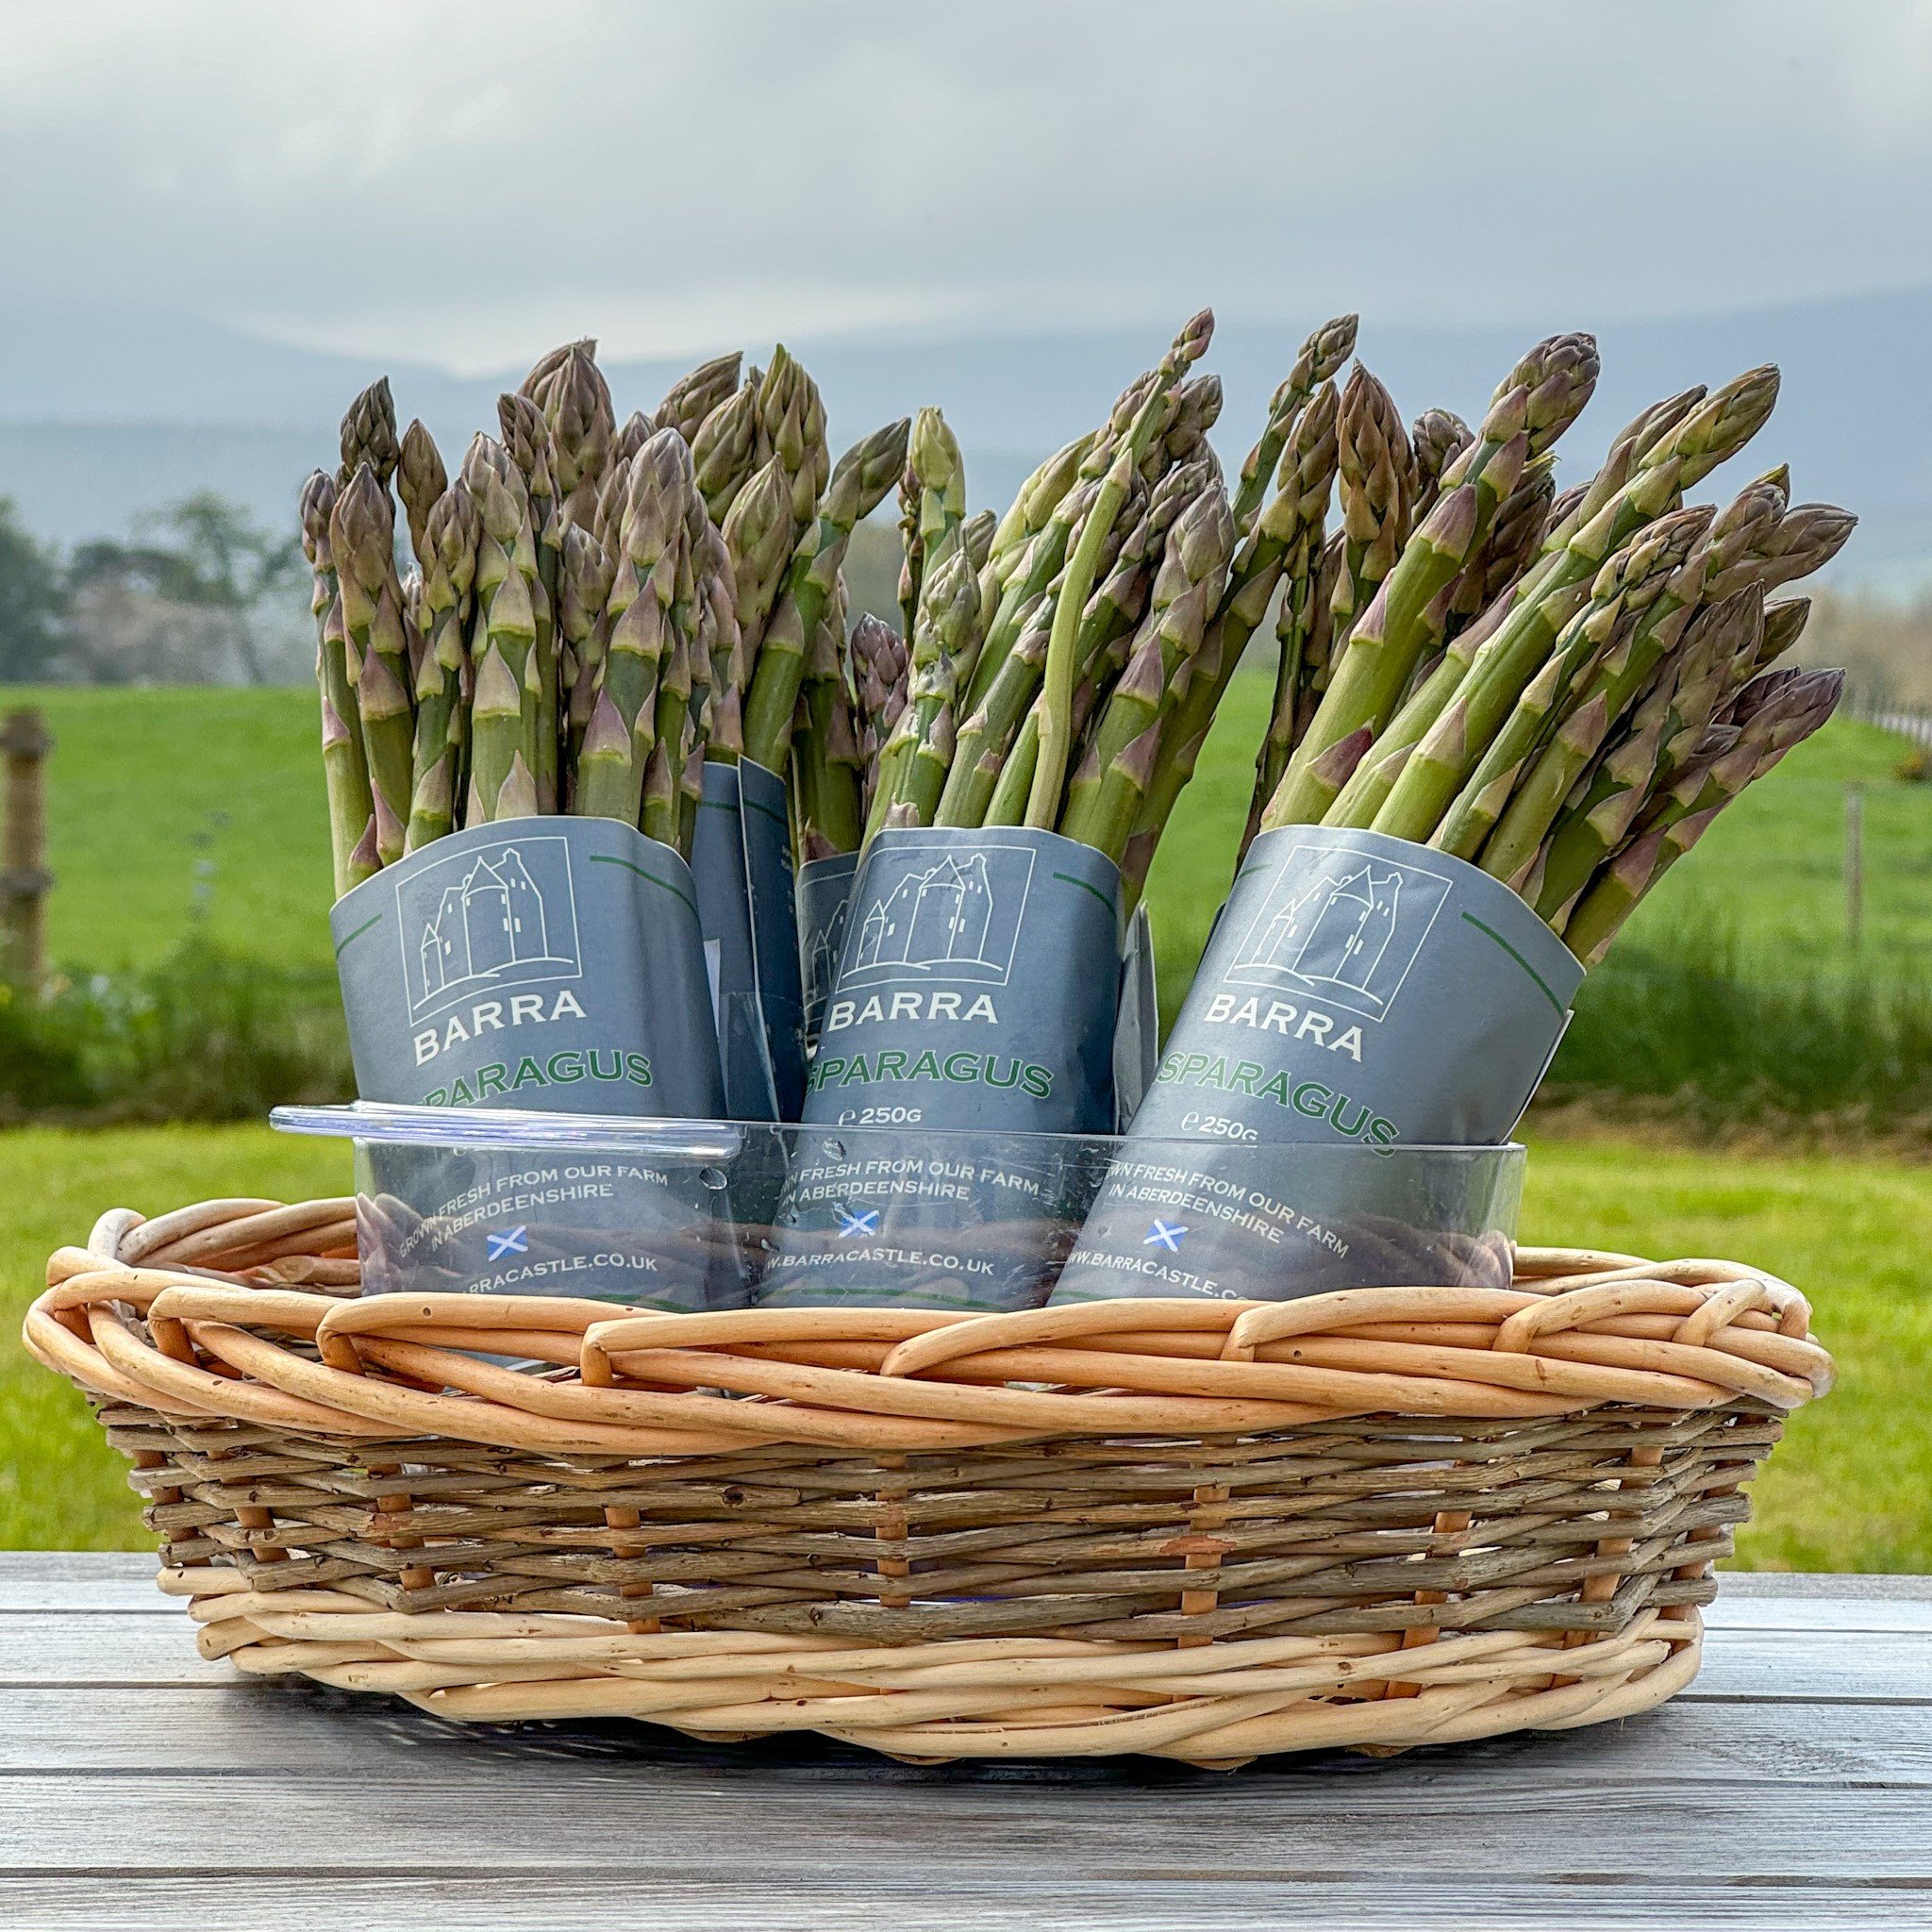 This month our 'pick of the crop' is asparagus from @barraberries .
It wouldn't be May without asparagus and this year it&rsquo;s making its mark as the first of the summer crops. You have to get it as fresh as possible - which is why it really ought